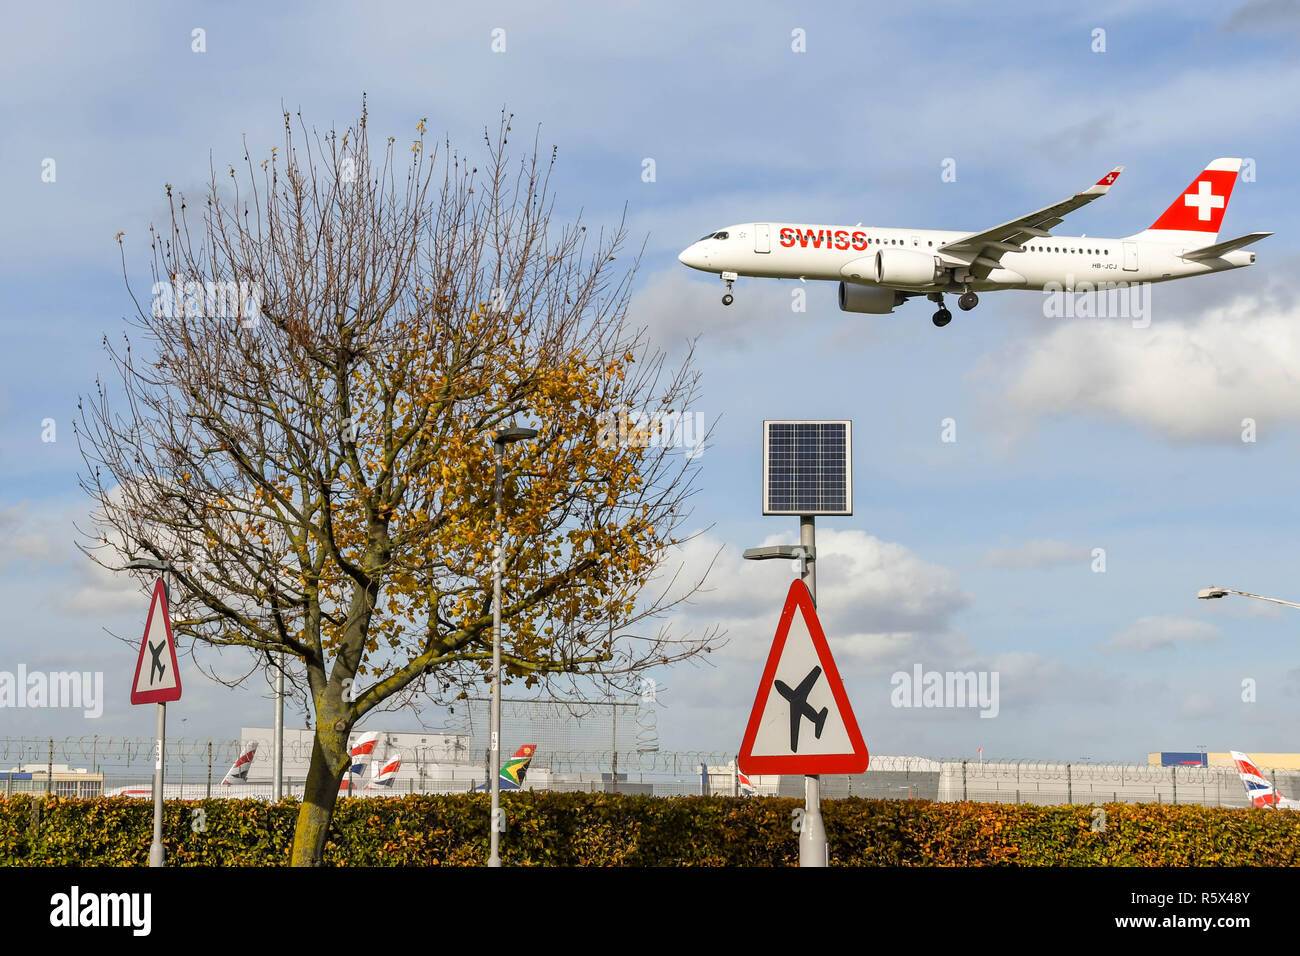 LONDON, ENGLAND - NOVEMBER 2018: Road sign on the A30 road at London Heathrow Airport warning motorists of low flying aircarft. A Swiss airlines jet i Stock Photo